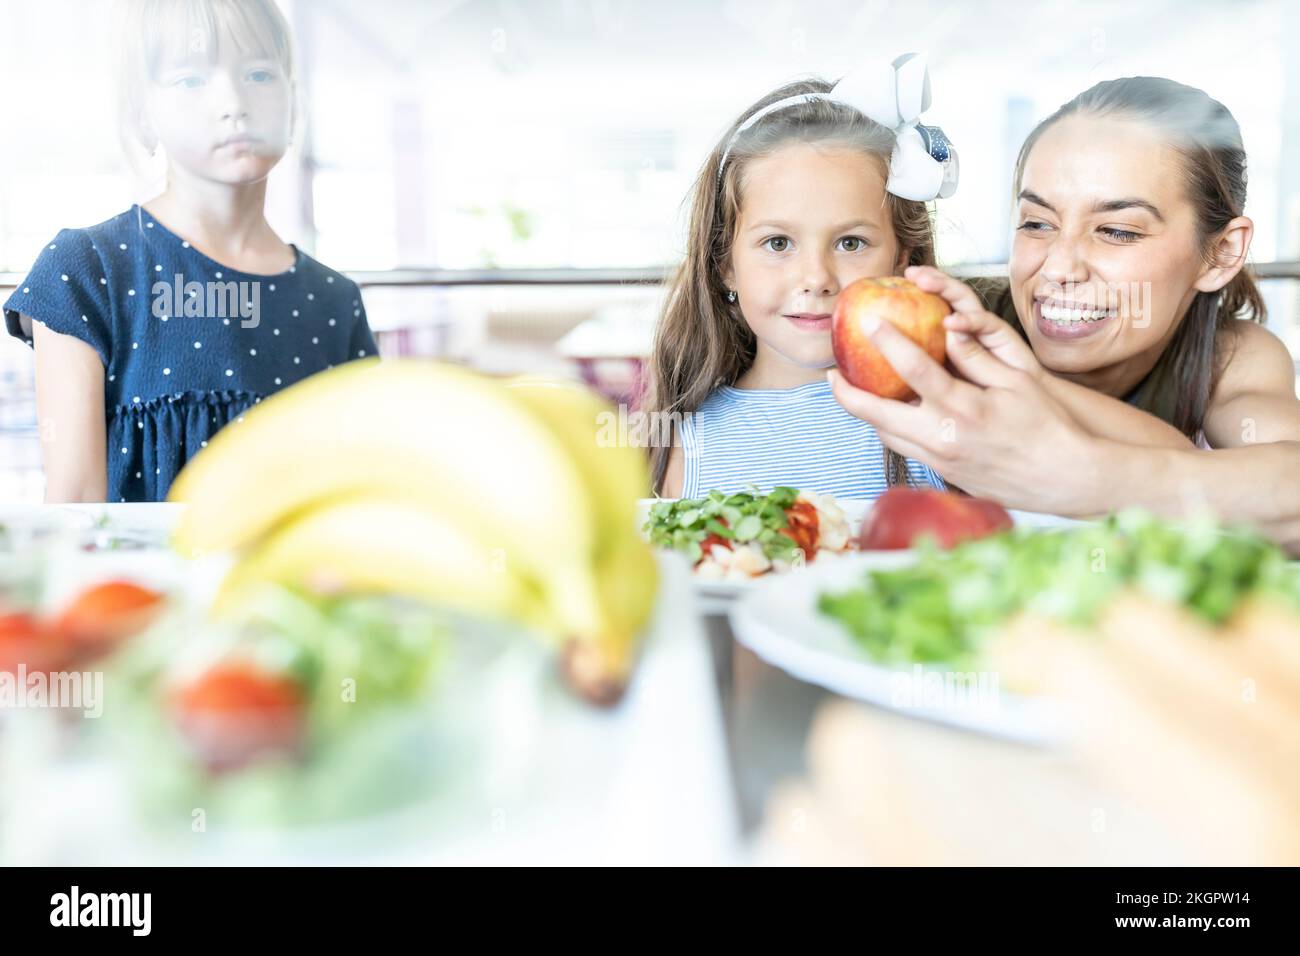 Teacher giving apple to student in school cafeteria Stock Photo